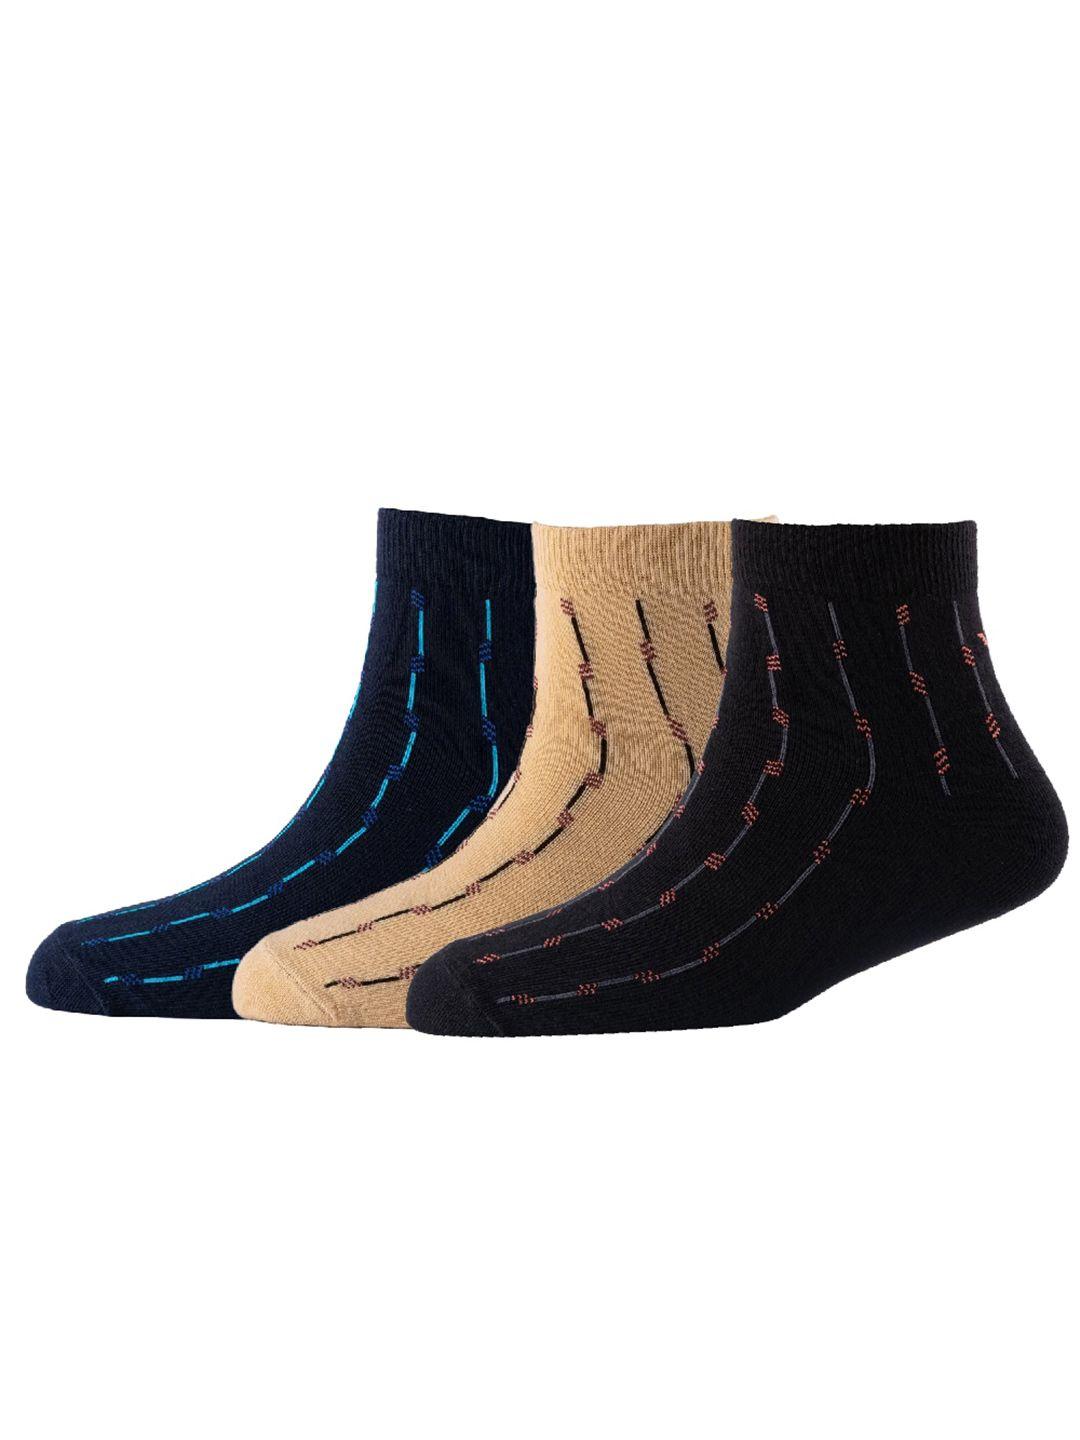 cotstyle men pack of 3 patterned pure cotton above ankle-length socks